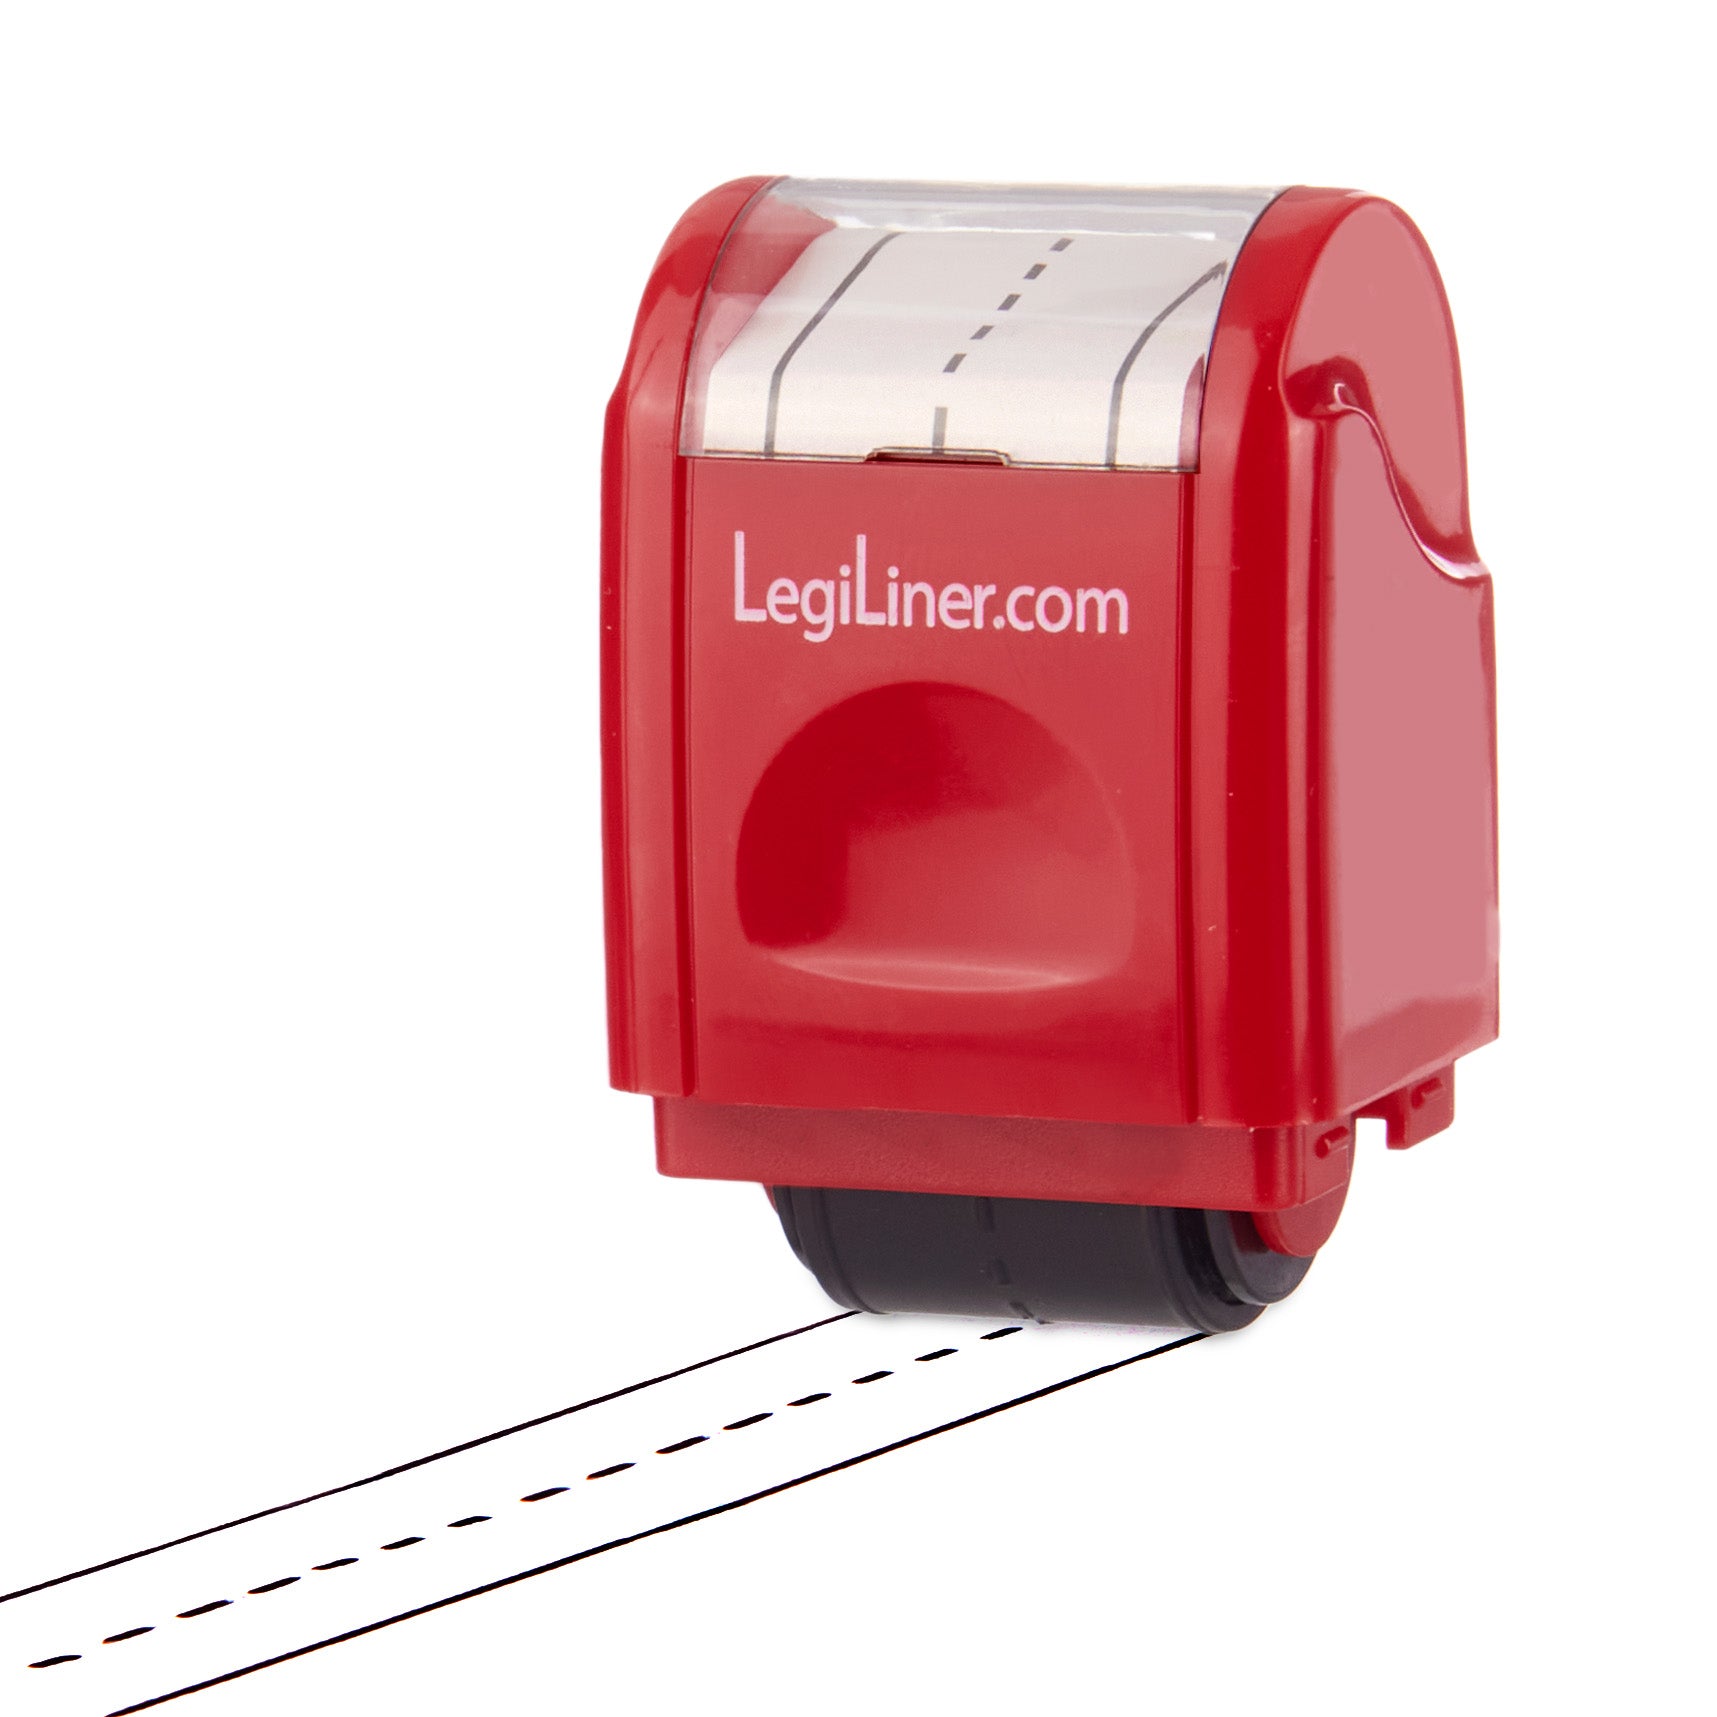  Promot Self Inking Personalized Stamp - Up to 4 Lines